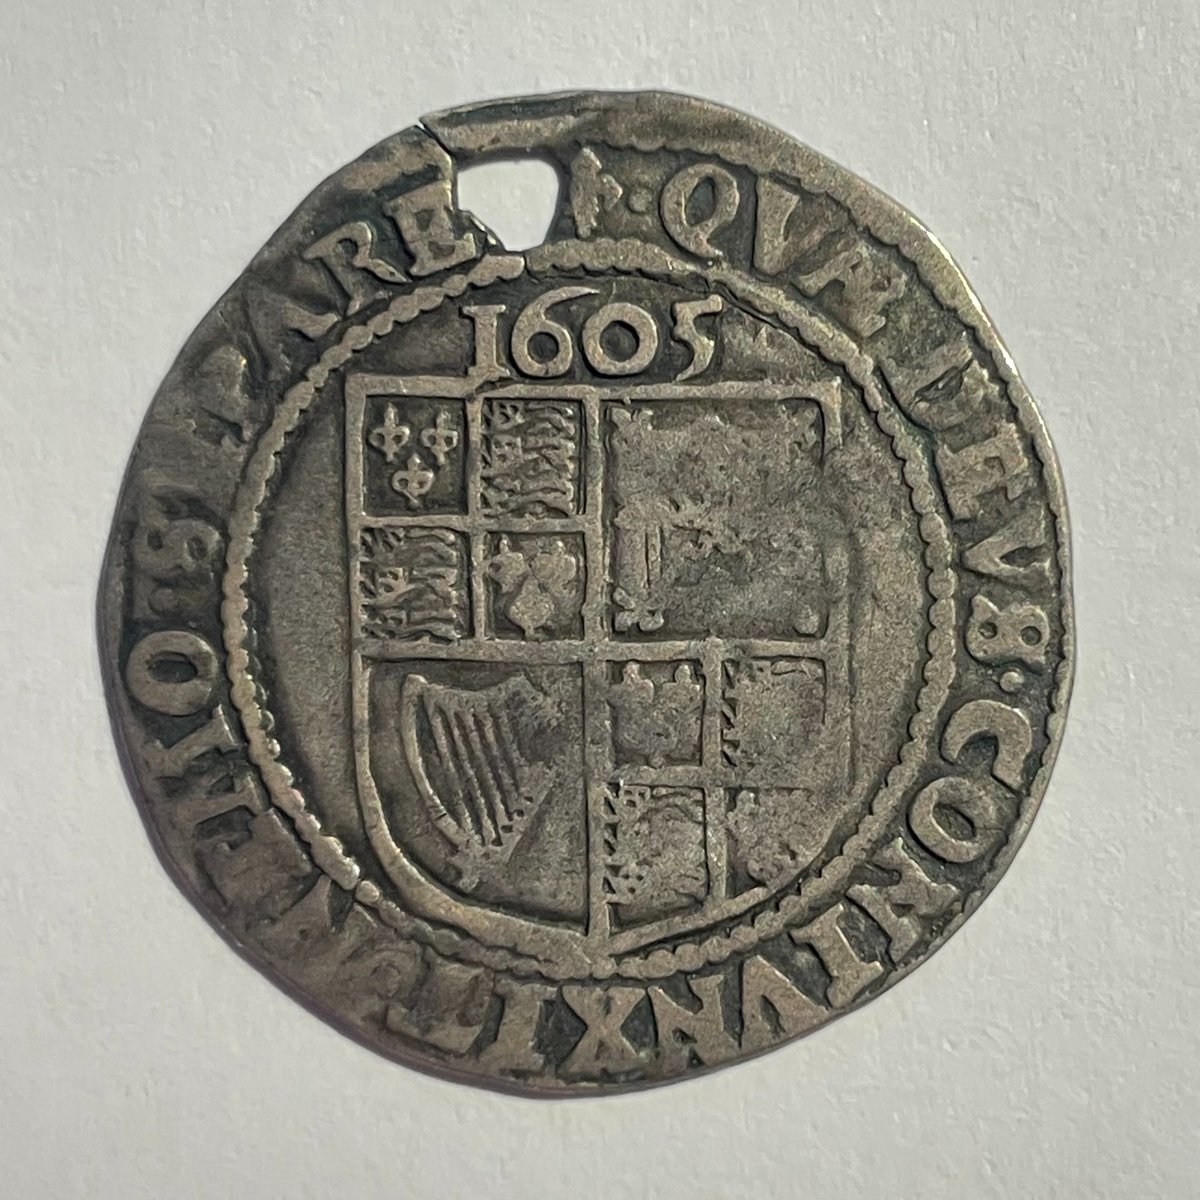 1605 dated sixpence of King James VI & I. It was made in the Tower of London, where many of the #GunpowderPlot conspirators, including #GuyFawkes, were imprisoned and tortured prior to their executions. #Numismatics #BonfireNight #BonfireNight2022 #History #SaturdayNightCoinShow